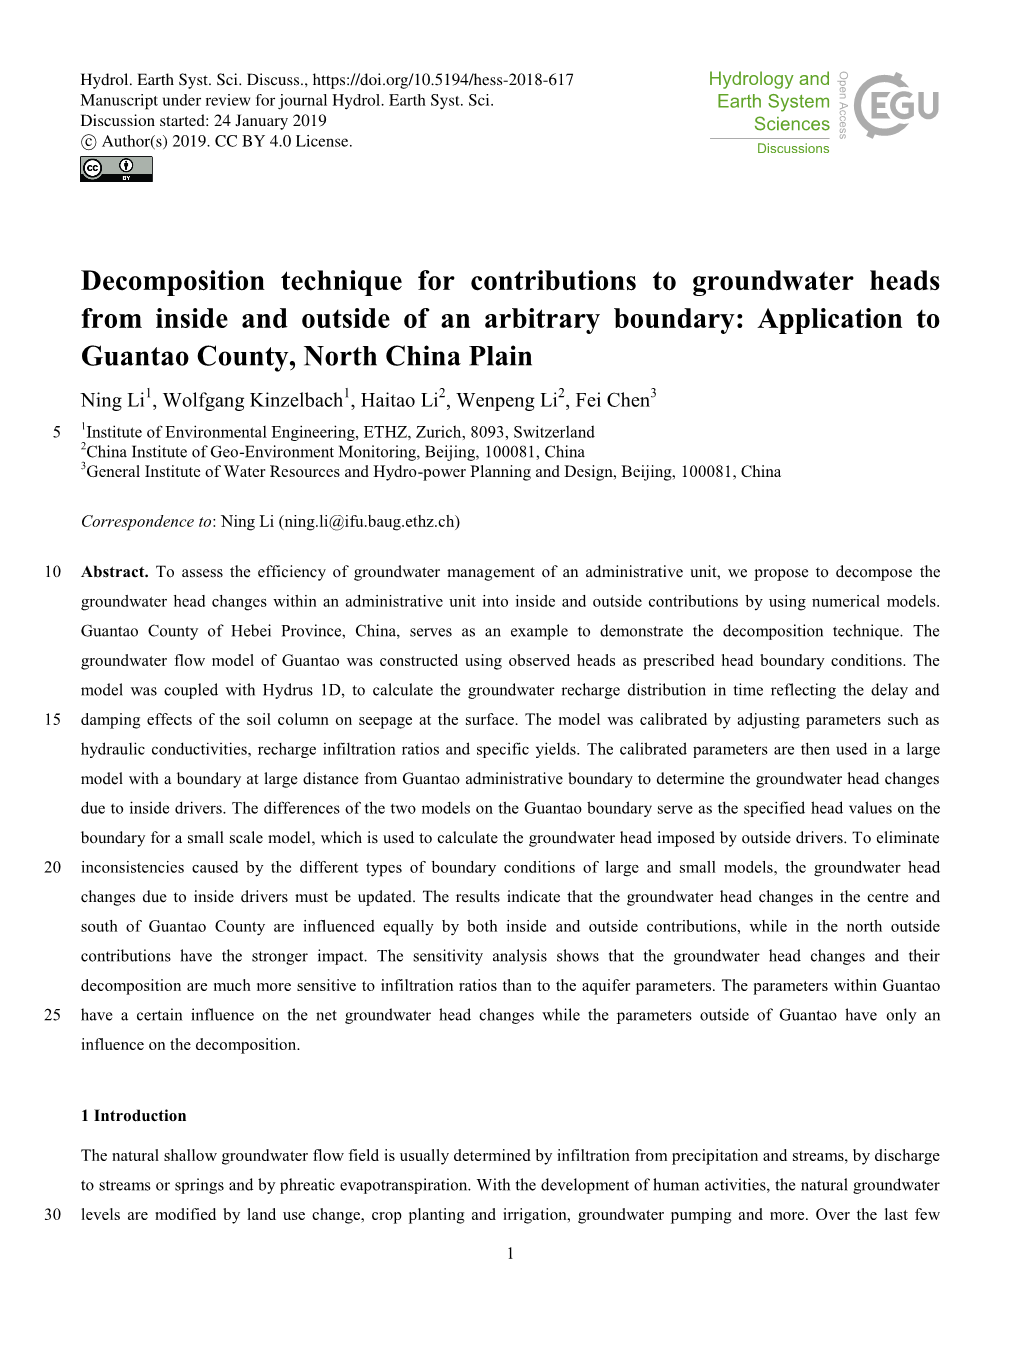 Decomposition Technique for Contributions to Groundwater